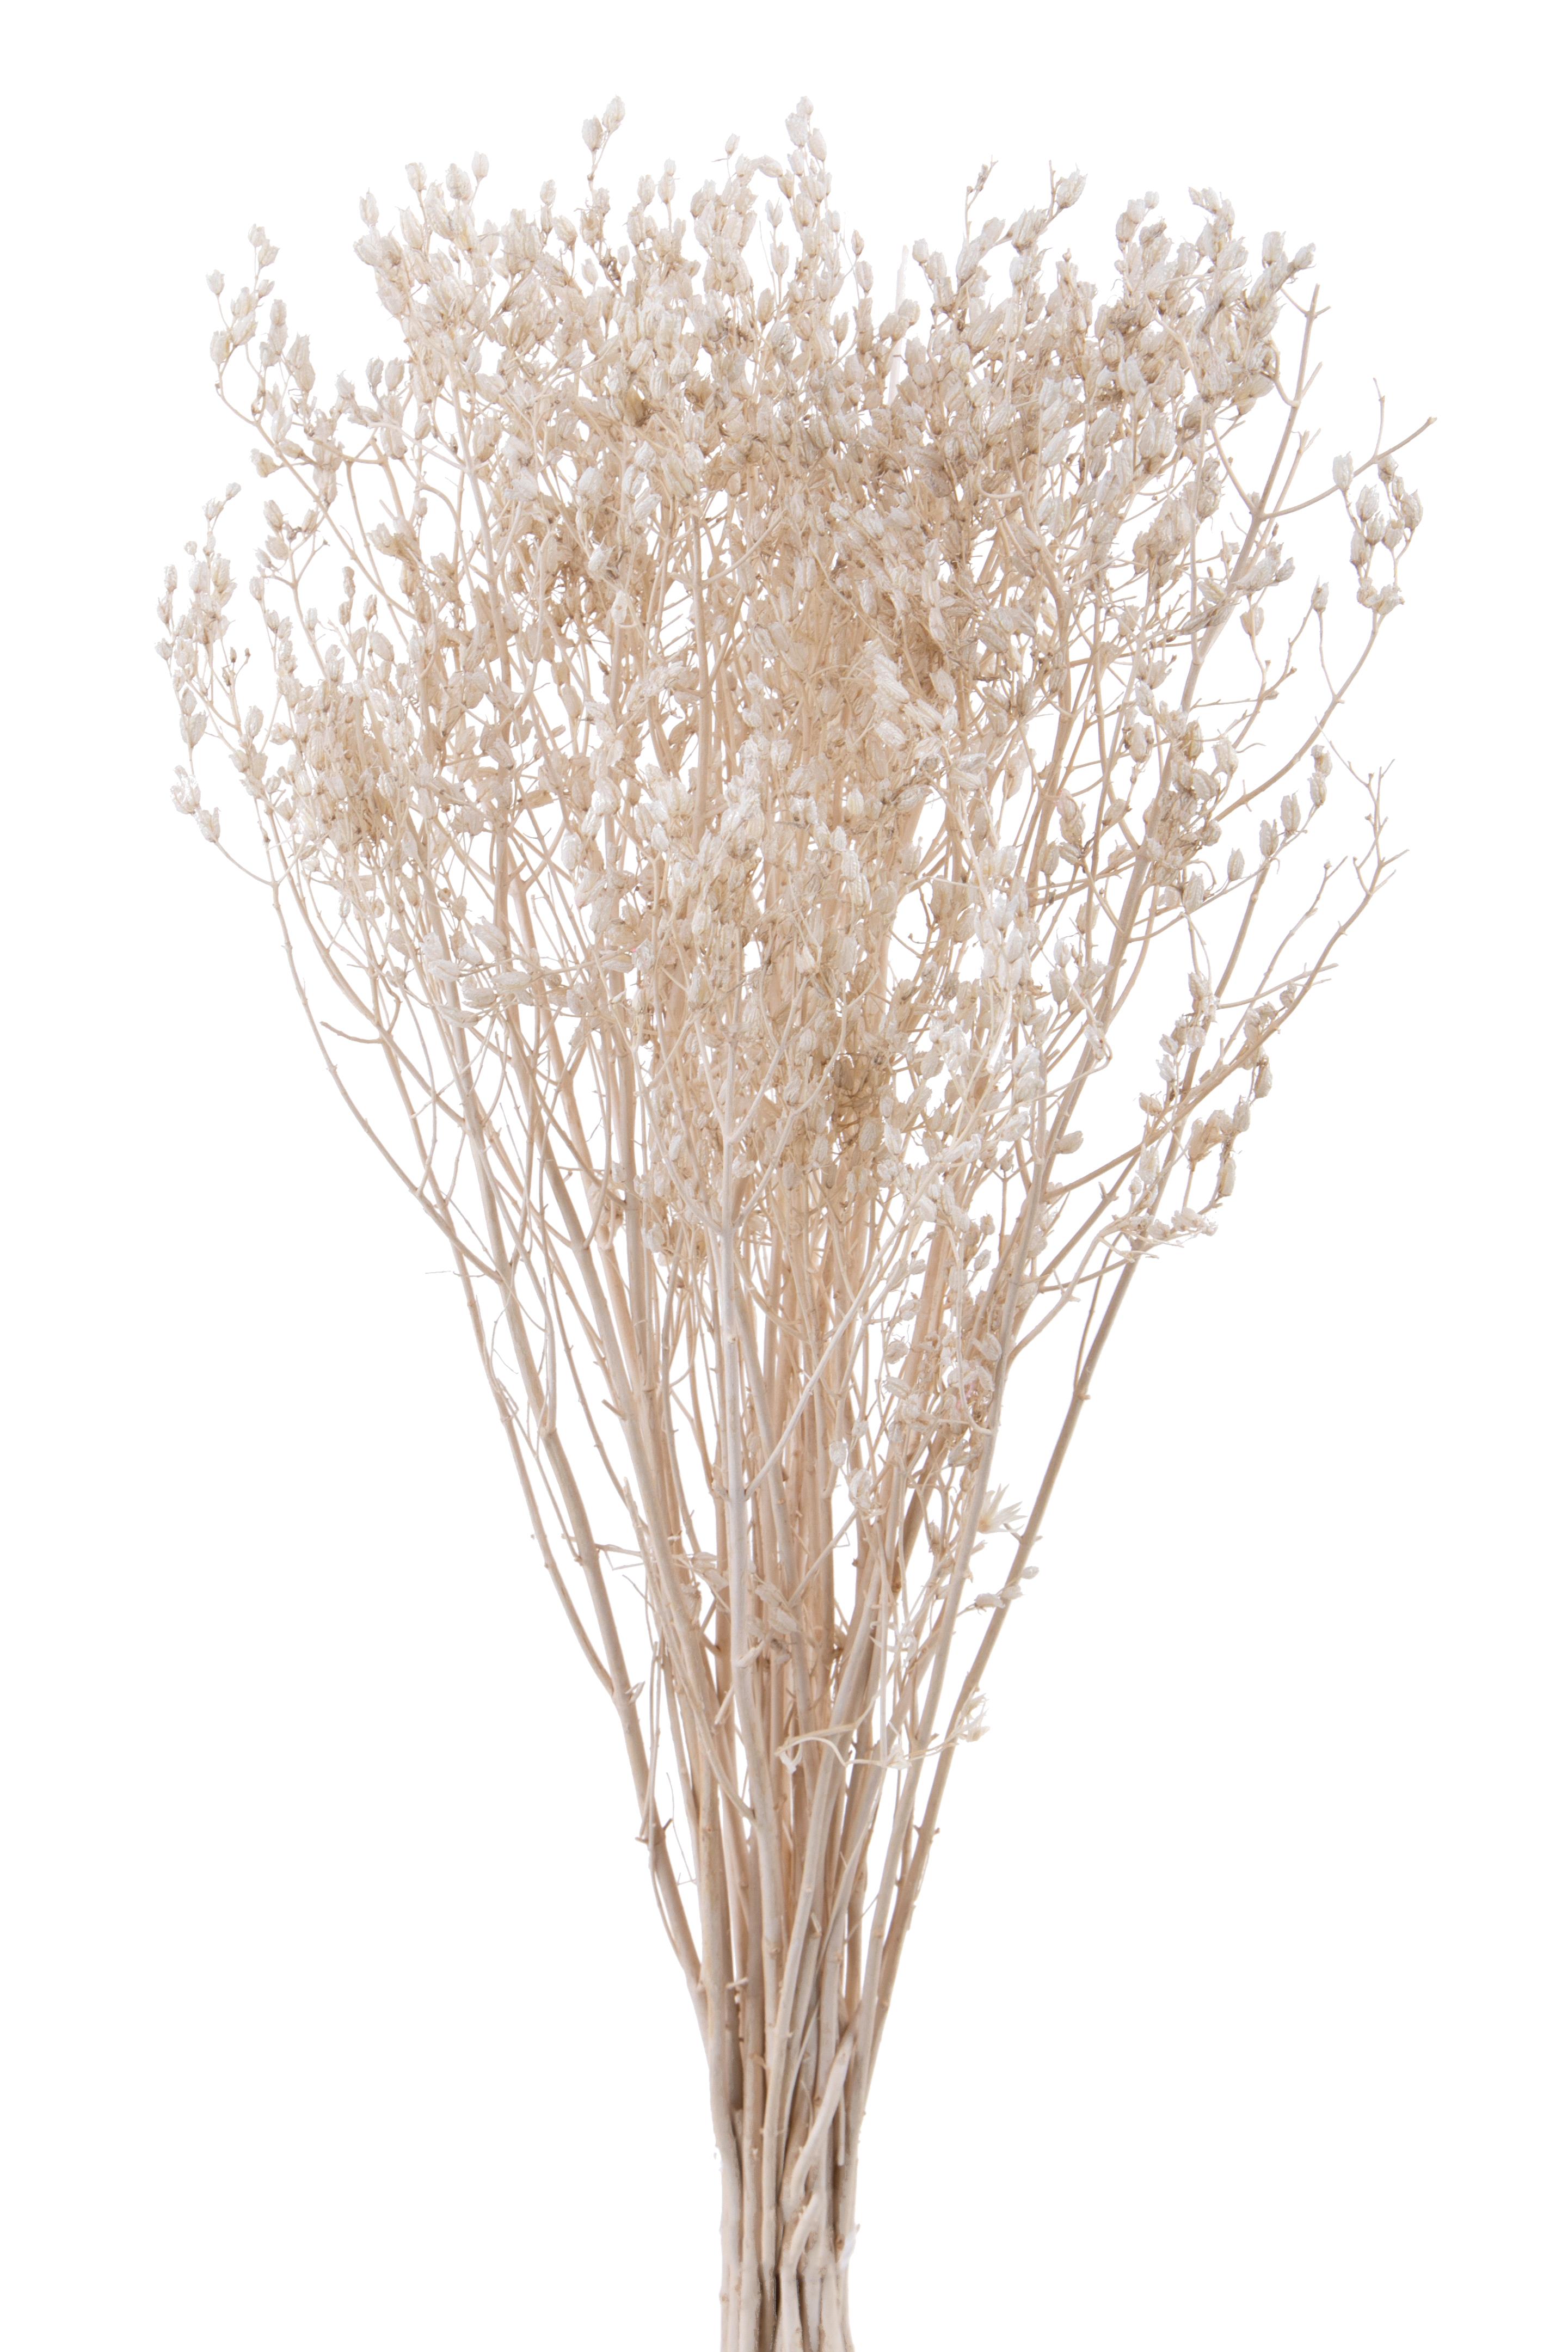 NATURAL PRODUCTS DRIED FLOWERS AND ERBS,ERBA CIPOLLA SBIANCATA 60 CM